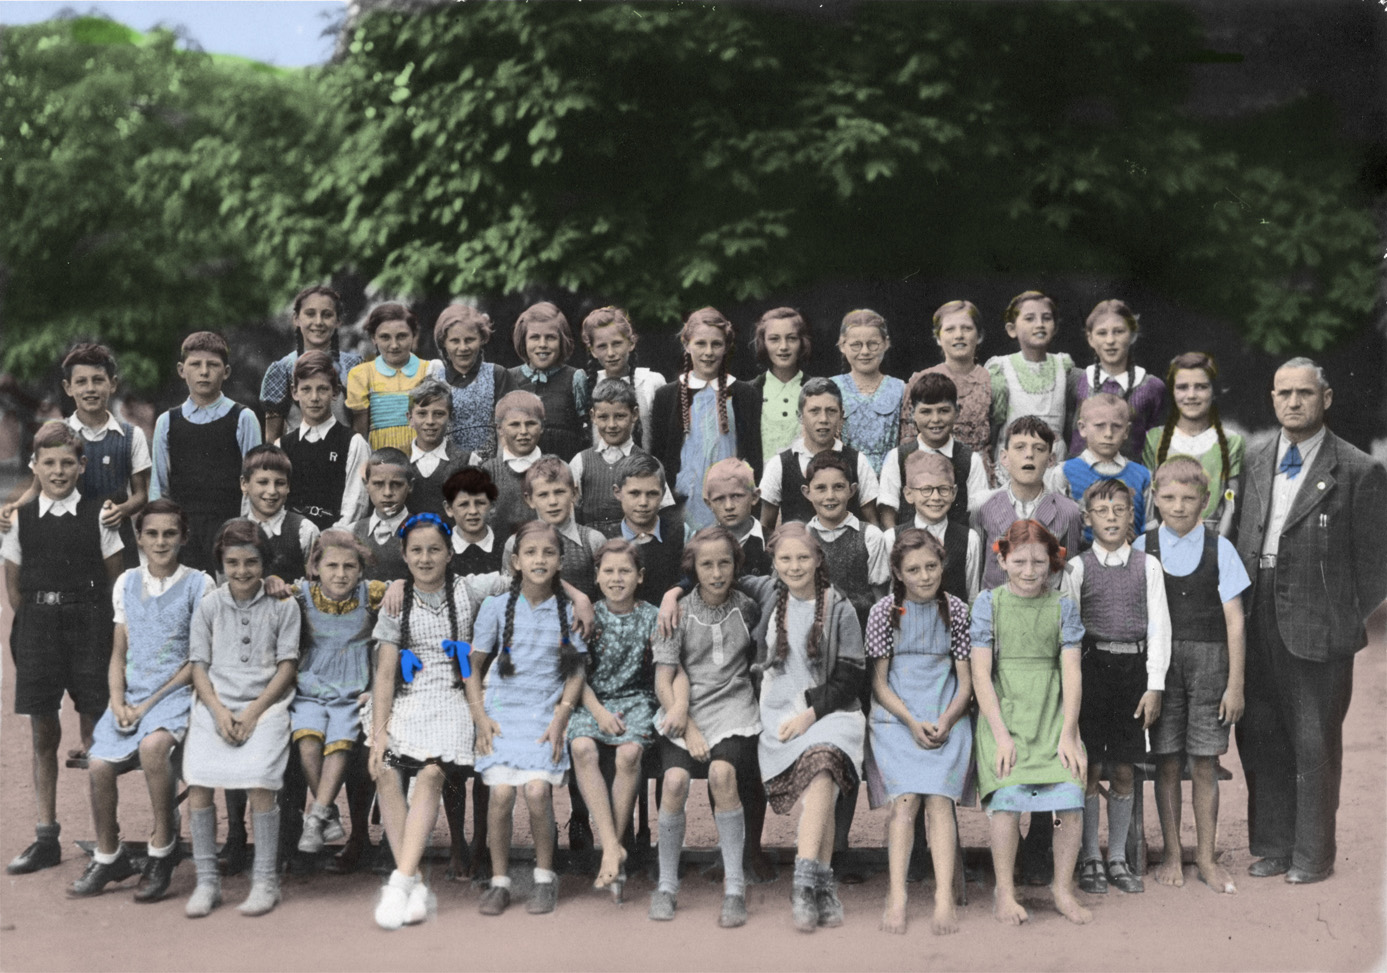 My Mom (with red hair); Elementary School 5th Grade, 1944  Wettingen, Switzerland. View full size.